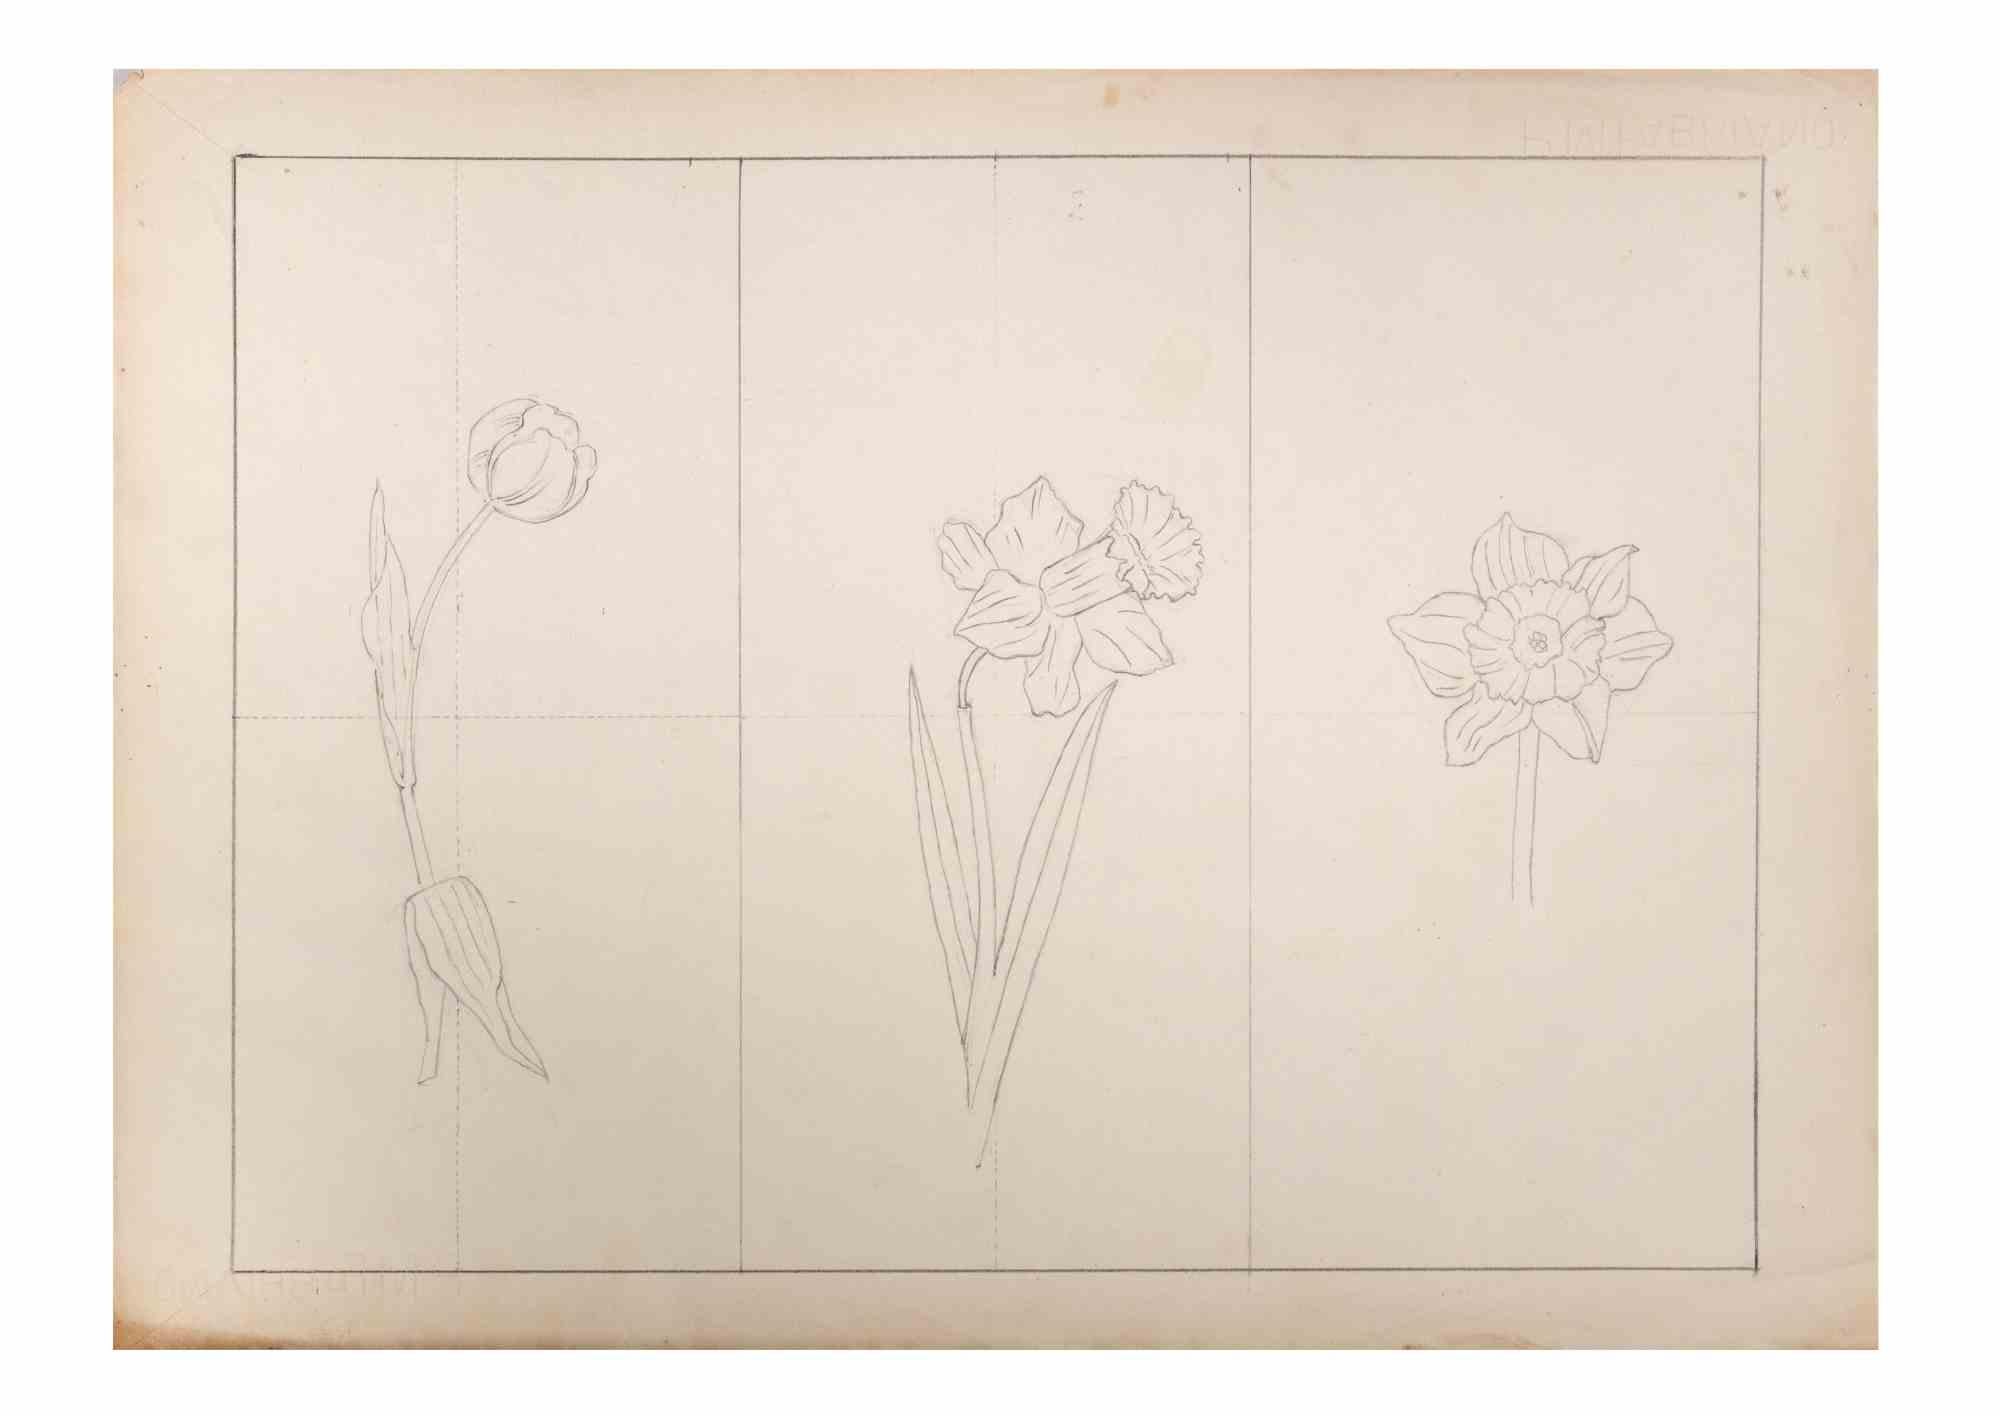 Jonquils is an Artwork realized by the Italian Artist Aurelio Mistruzzi in 1905.

Pencil Drawing on paper .

Good conditions.

Aurelio Mistruzzi (1880-1960) studied at the Udine Art School, having classes with the Sculptor De Paoli. He moved to